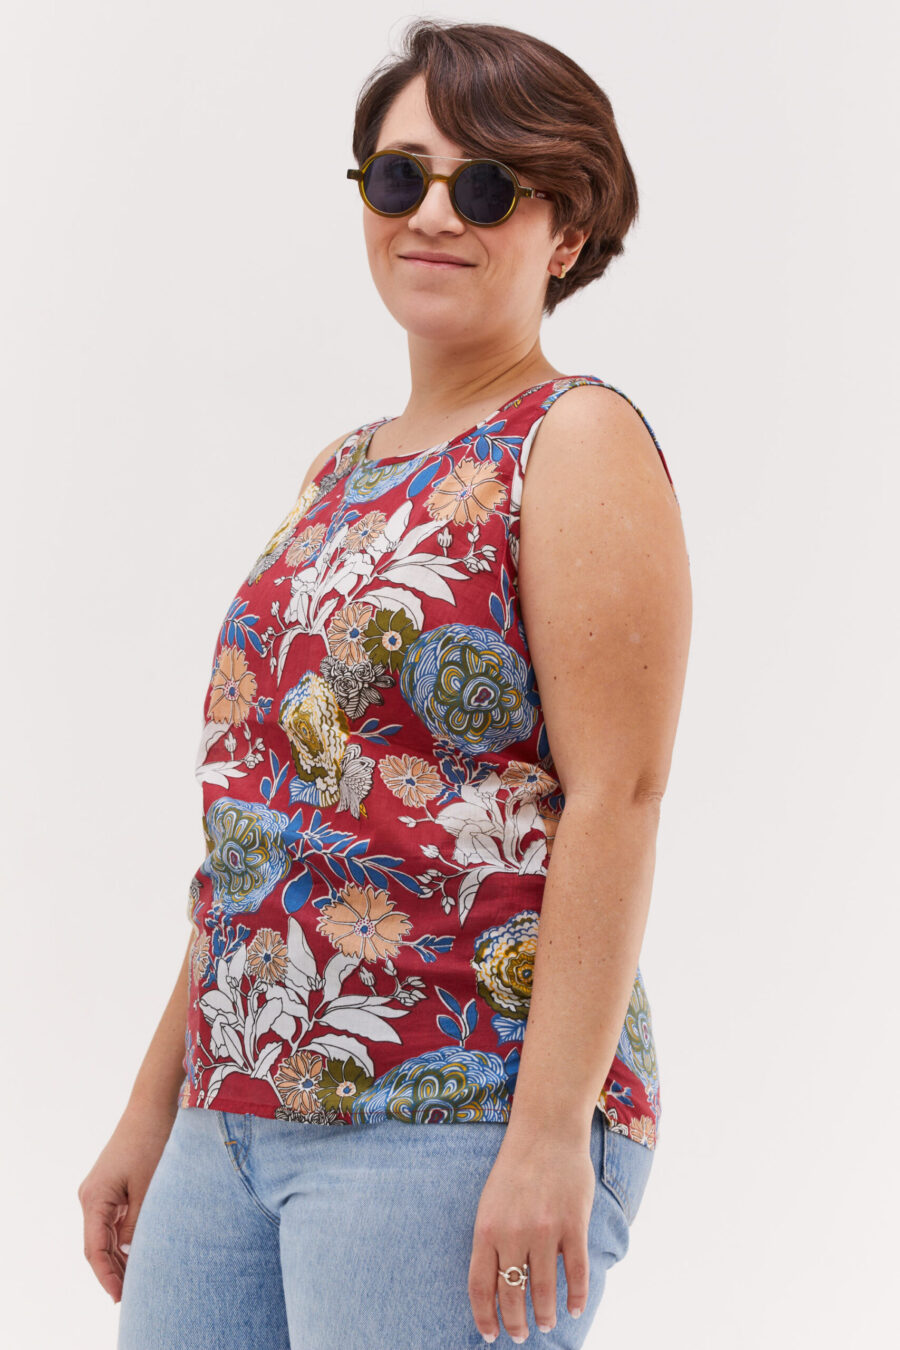 Flattering and comfortable tanktop – Red blossom, colorful floral print on a red tanktop by comfort zone boutique